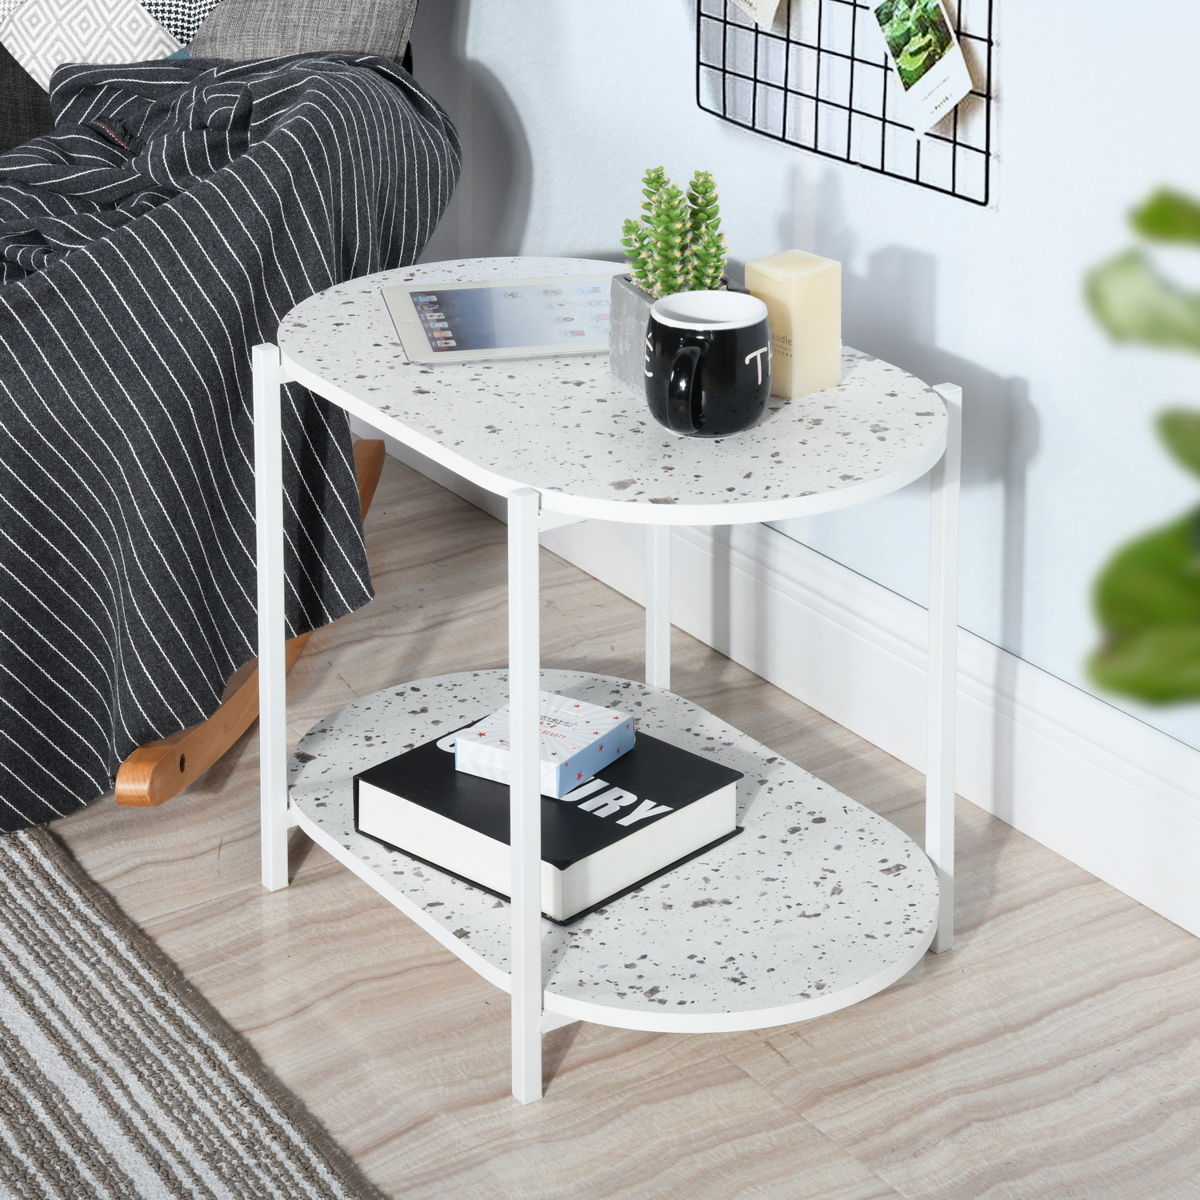 End Table 24" 2-Tiers Oval Nightstand, Modern Marble Small Table Coffee Tea Sofa Table For Living Room Indoor Balcony